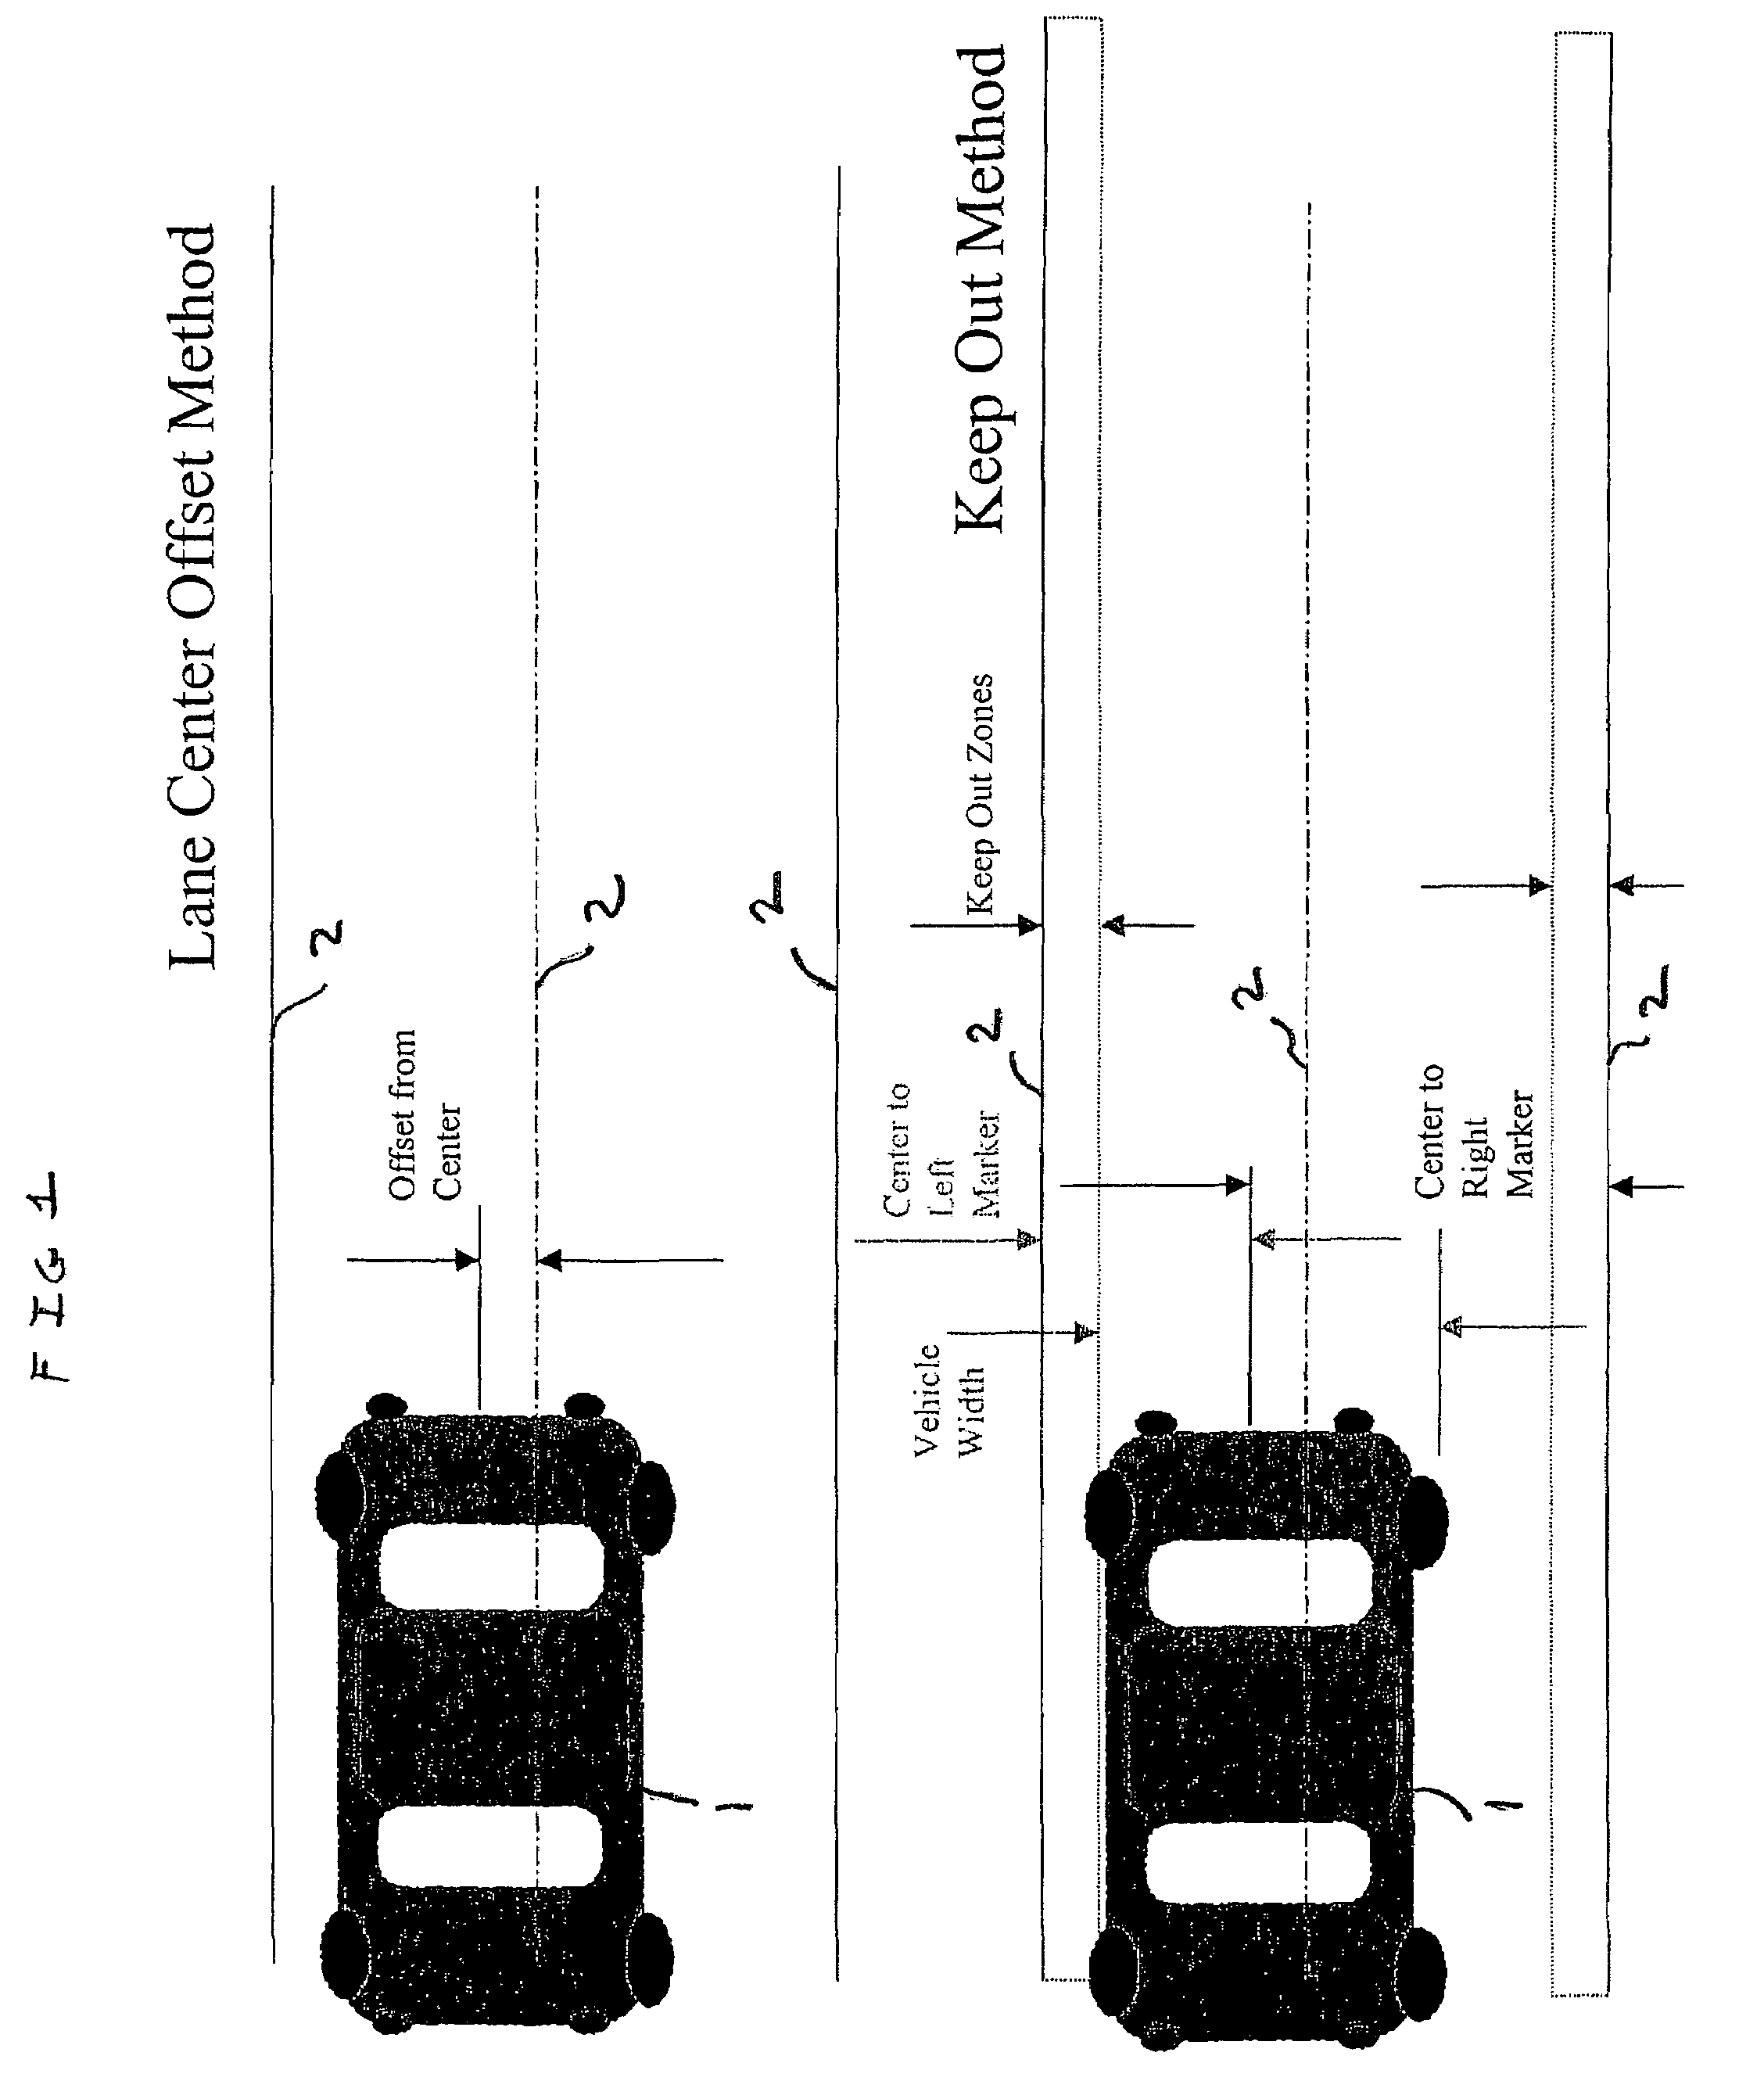 Steering system with lane keeping integration